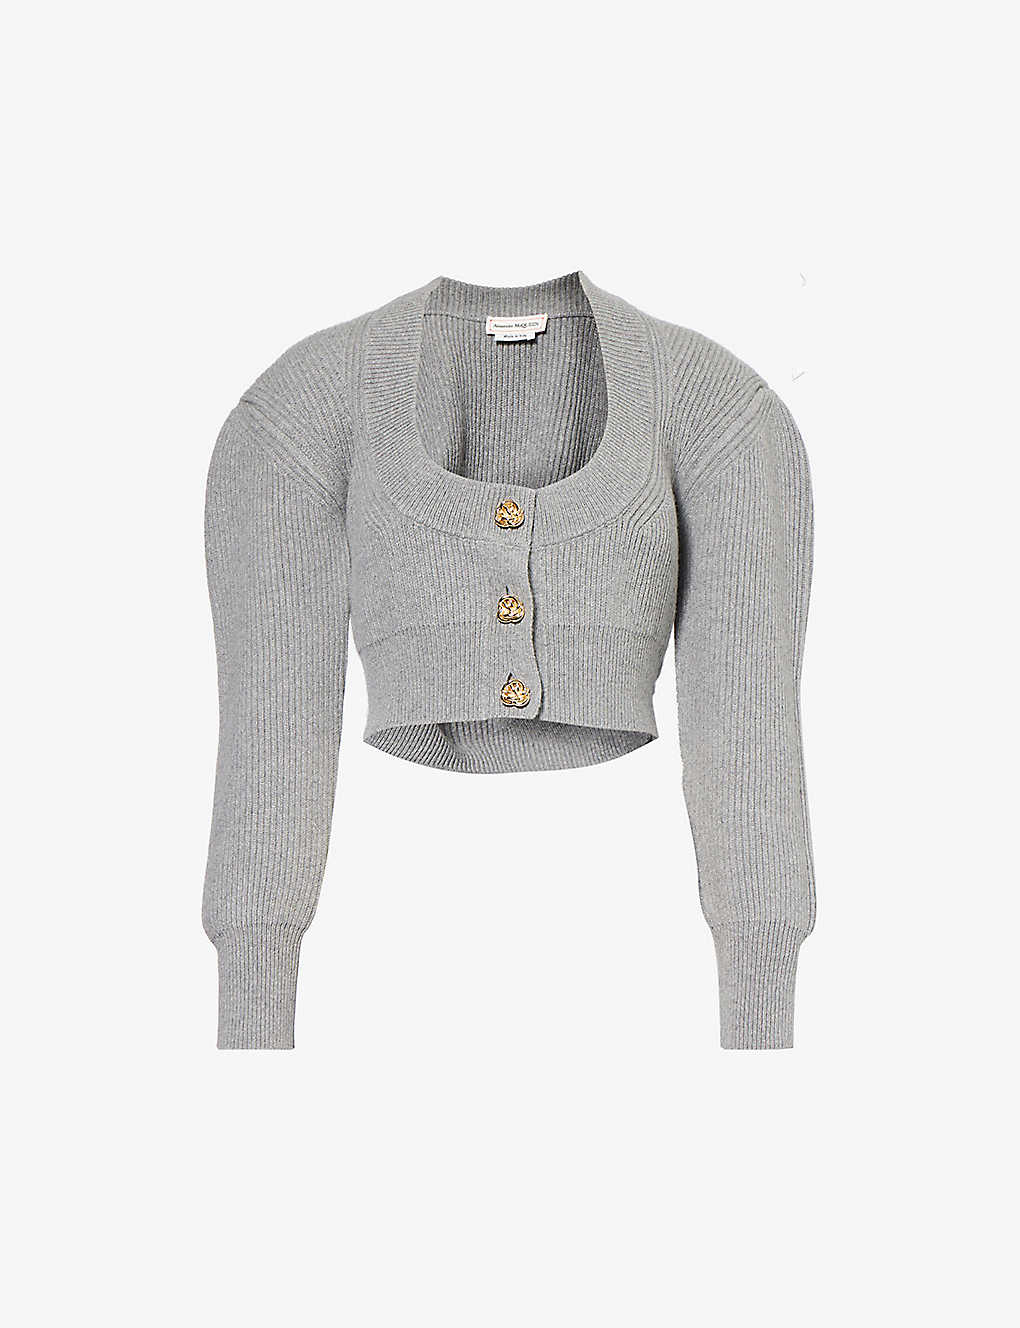 Alexander Mcqueen Cropped Wool And Cashmere Cardigan In Grey Melange